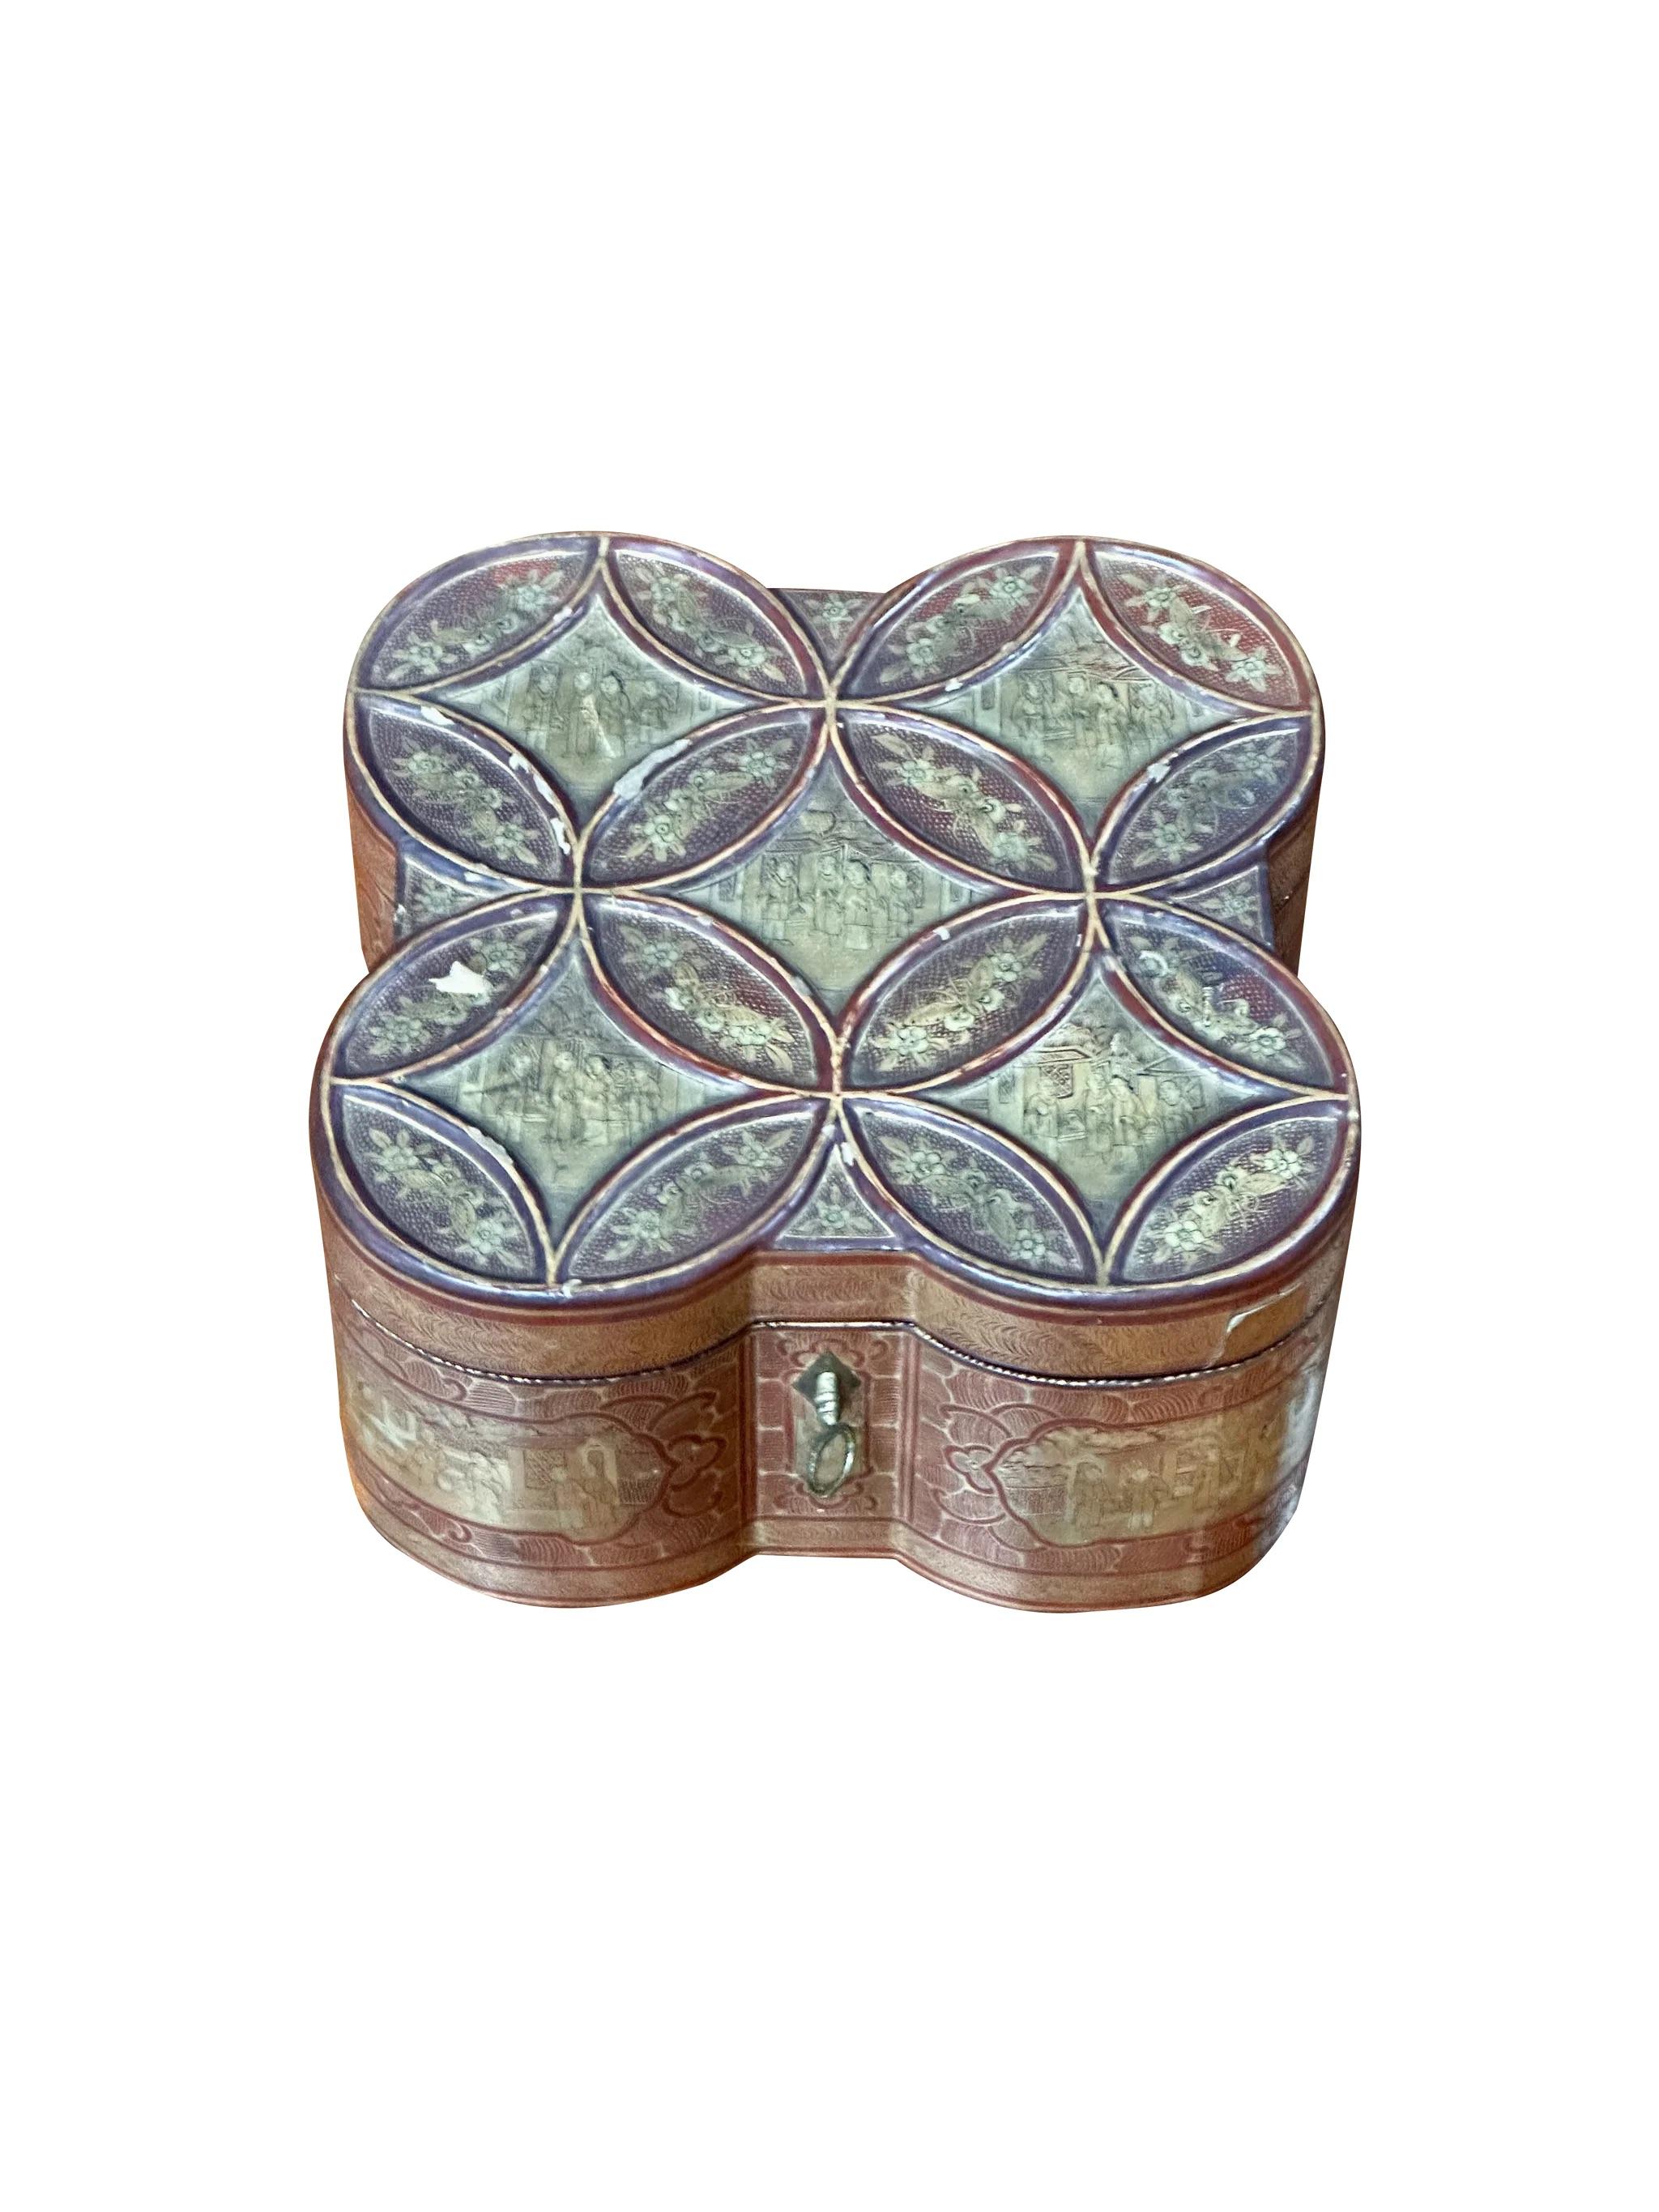 Rare Quatrefoil Chinese Export Tea Caddy, 19th Century In Good Condition For Sale In Charlottesville, VA